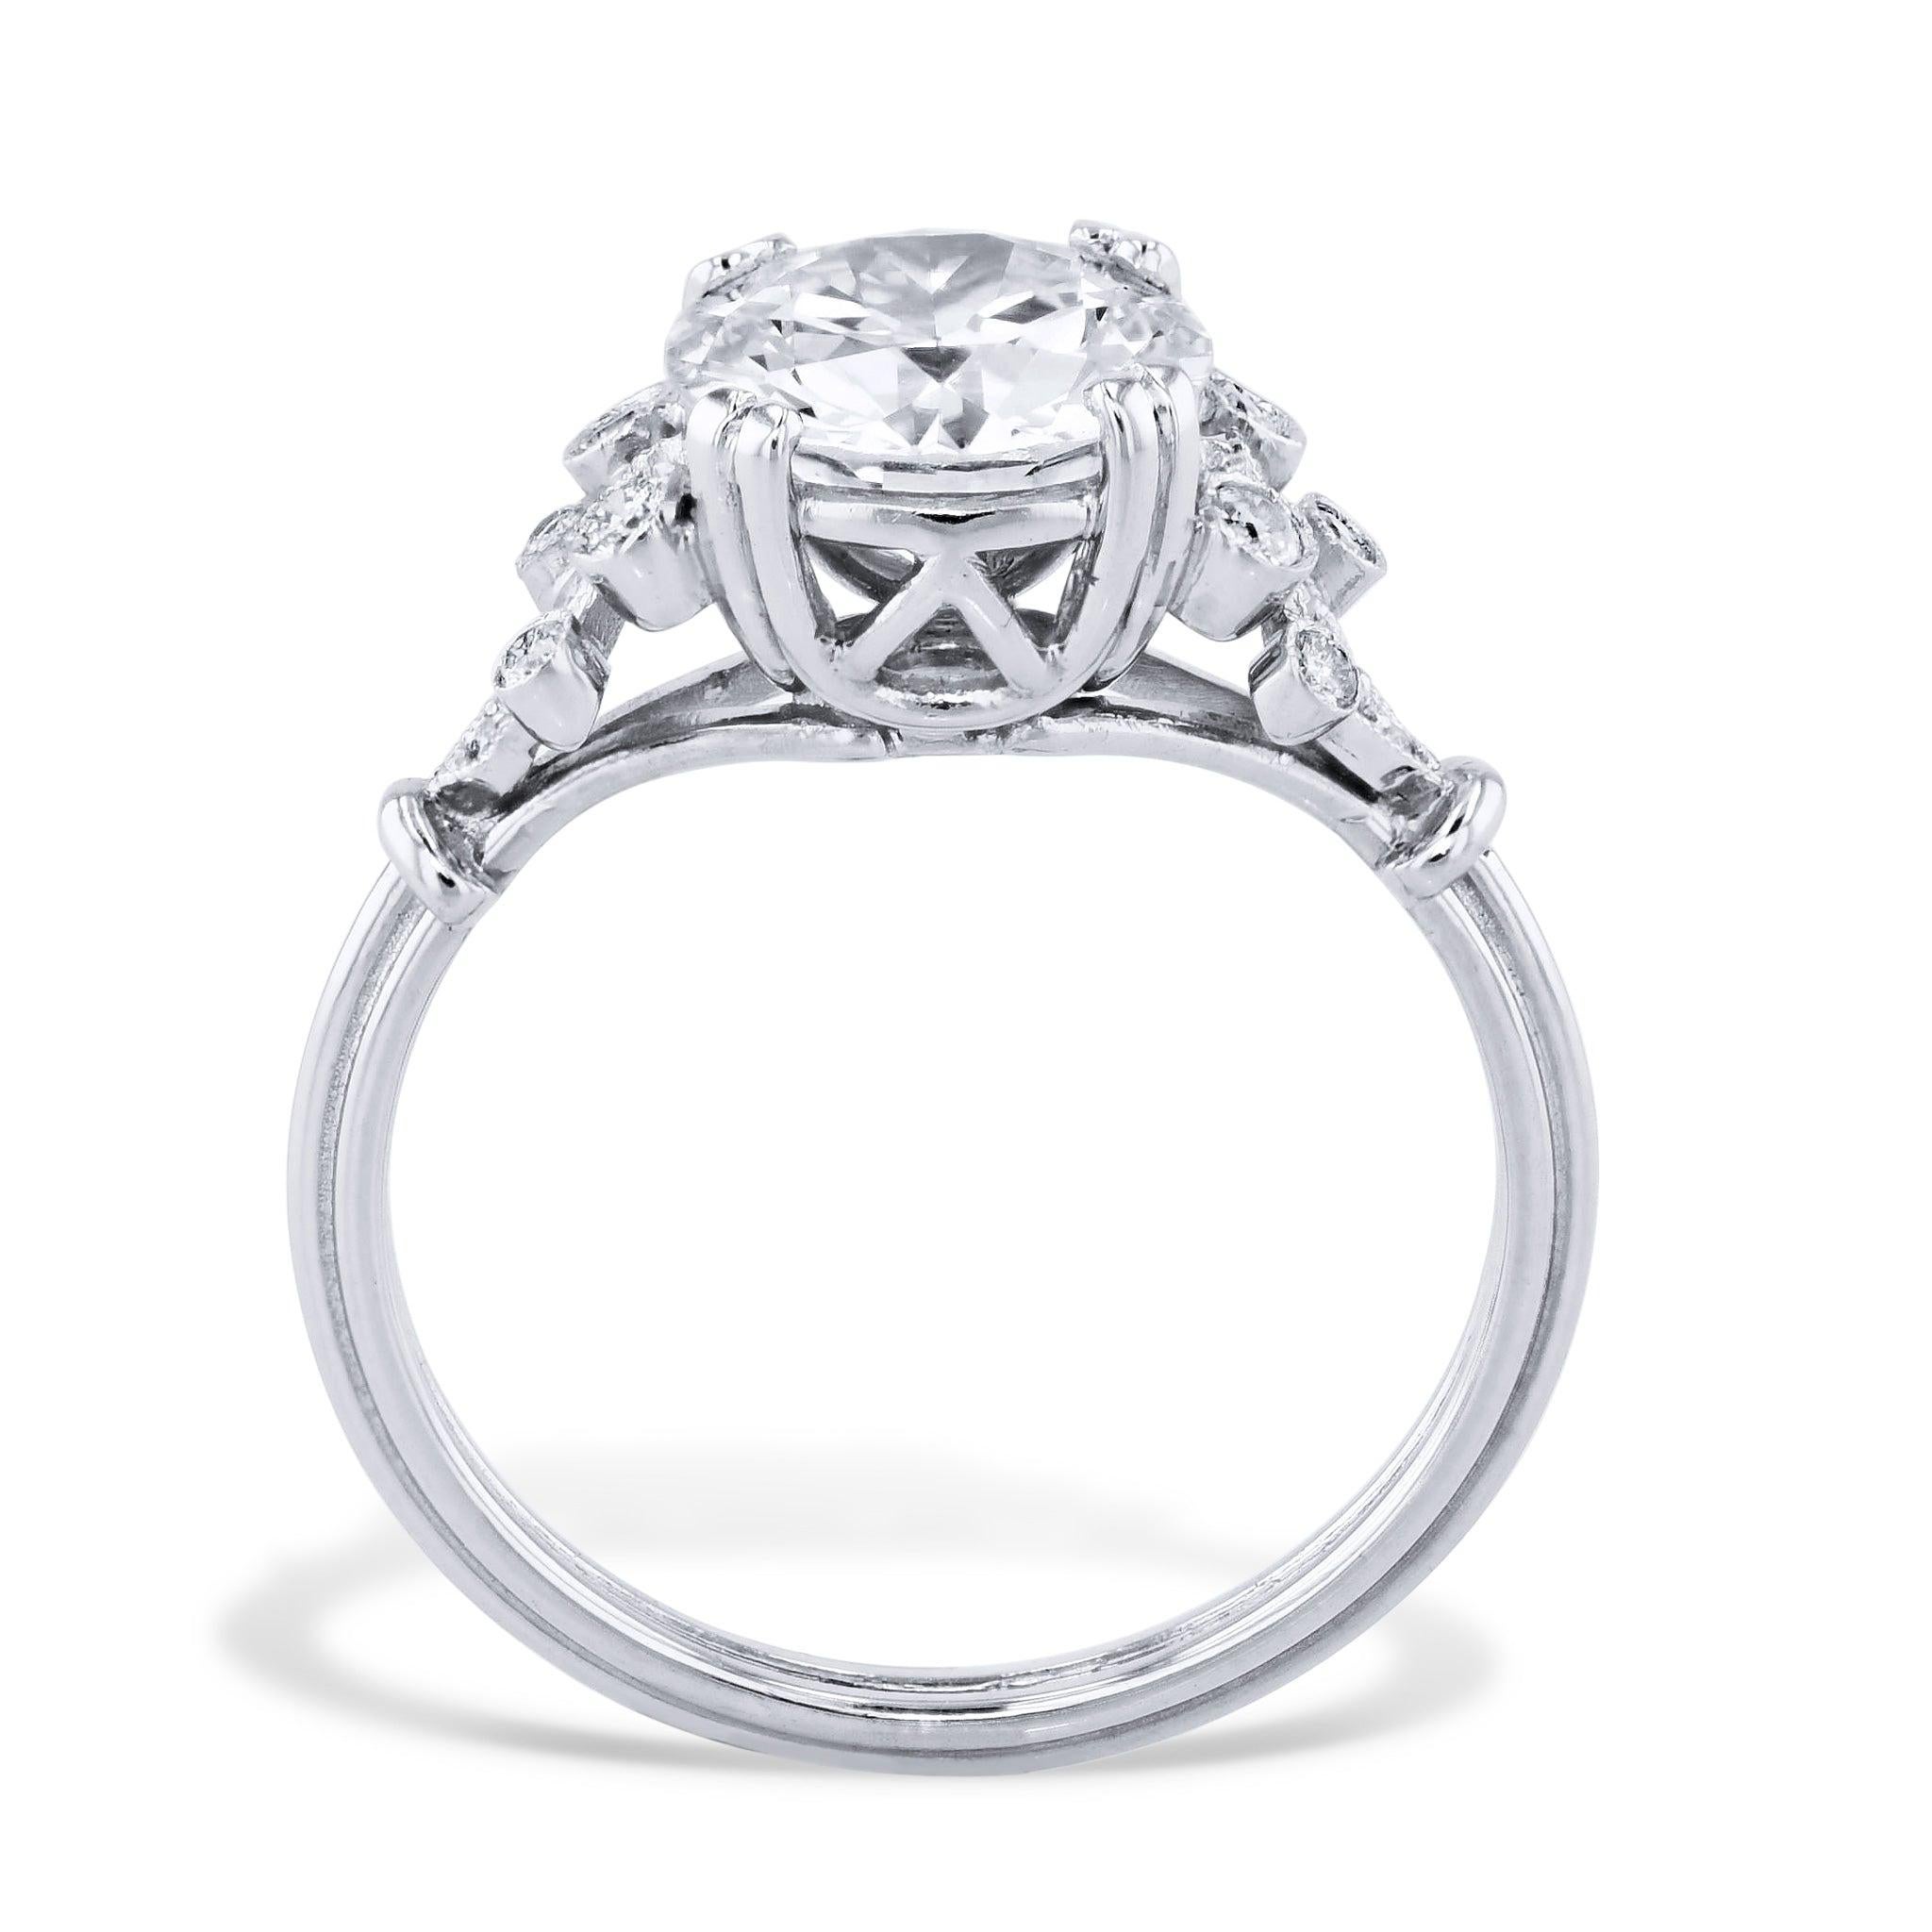 This exquisite Transitional Cut Diamond Platinum Engagement Ring includes a refined center diamond with a captivating VG/G finish - authenticated by G.I.A. certificate # 5221284821. 
16 glittering diamonds decorate the handcrafted H&H Collection